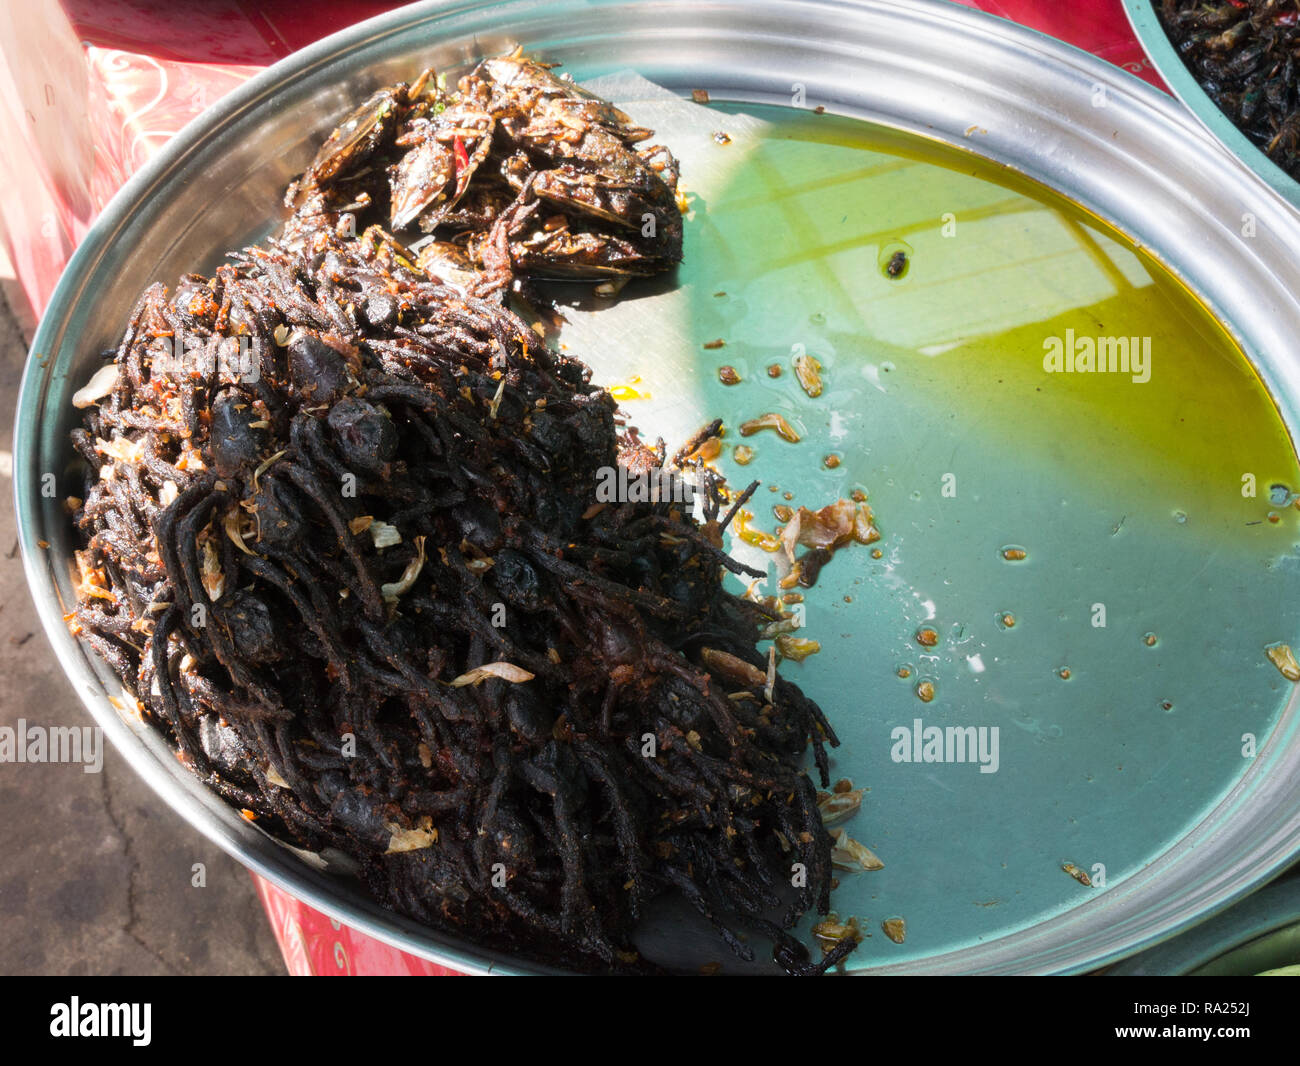 Plate of deep fried tarantulas and crickets for sale in Skuon Town Internationally reknown market Cambodia Asia also known as Spider Village Stock Photo